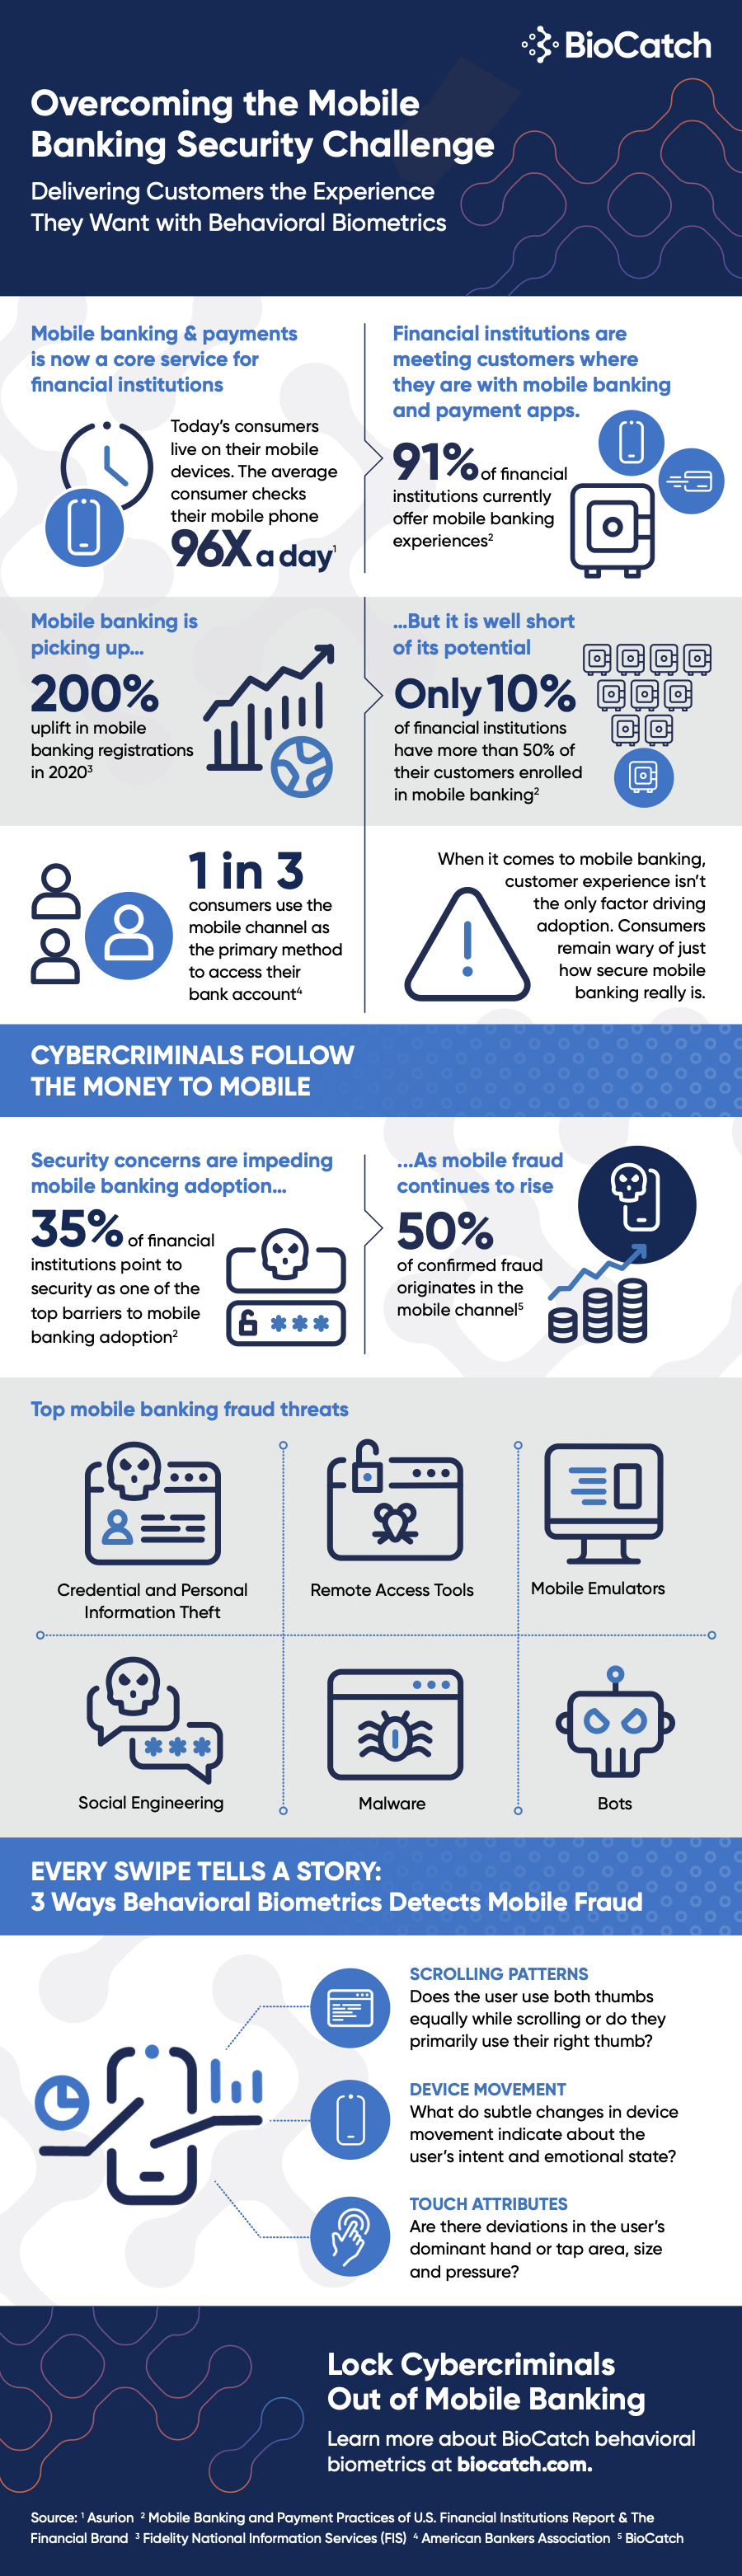 Lock Cybercriminals Out of Mobile Banking with Behavioral Biometrics